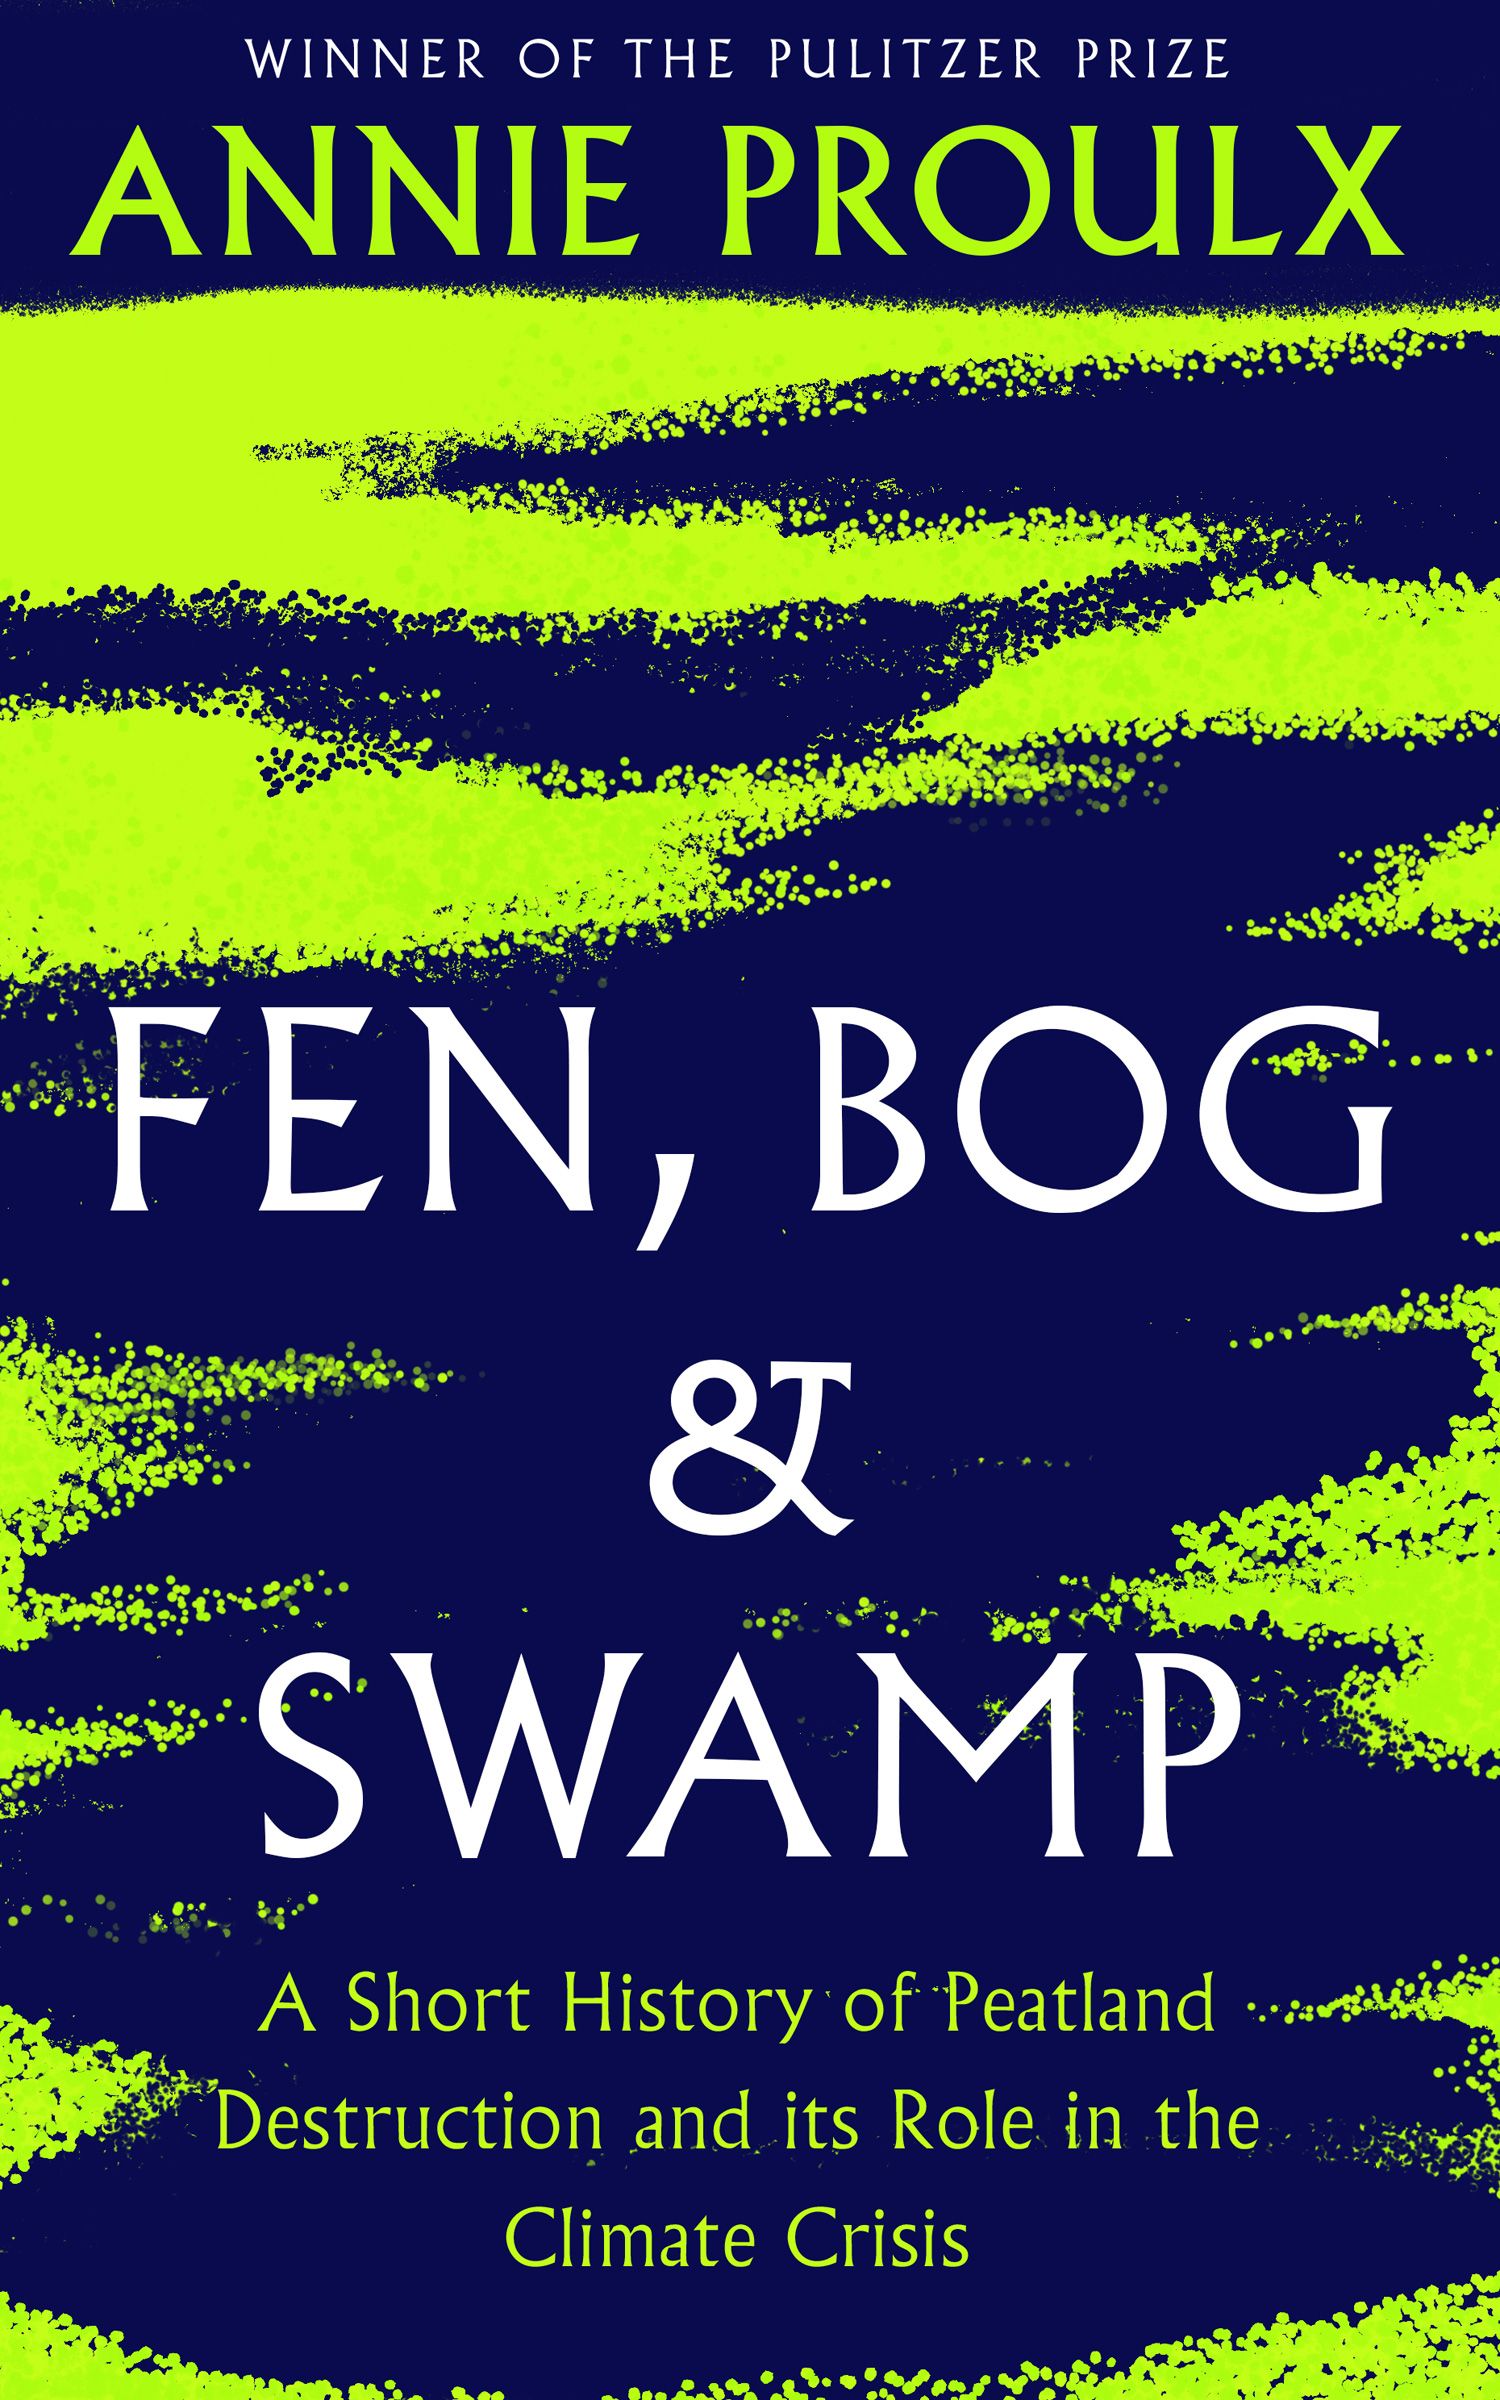 Bogs and Fens